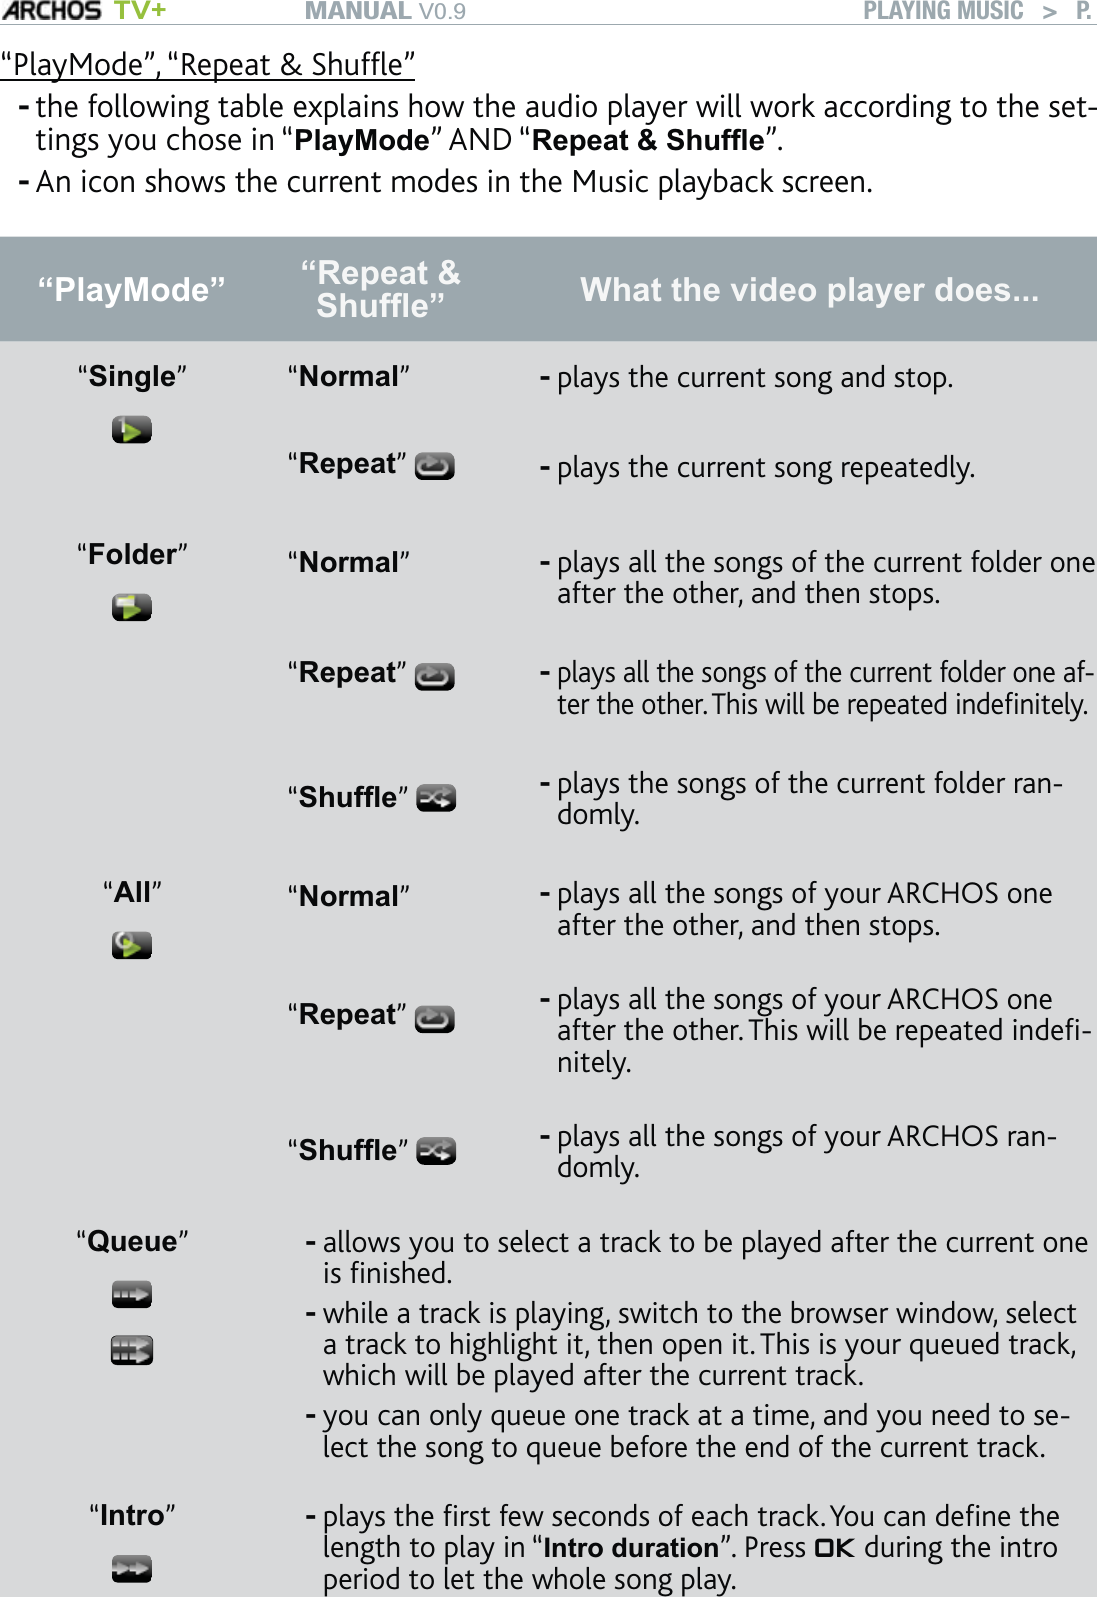 MANUAL V0.9 TV+ PLAYING MUSIC   &gt;   P. 23“PlayMode”, “Repeat &amp; Shufﬂe”the following table explains how the audio player will work according to the set-tings you chose in “PlayMode” AND “Repeat &amp; Shufﬂe”. An icon shows the current modes in the Music playback screen.“PlayMode”  “Repeat &amp; Shufﬂe” What the video player does...“Single”“Normal”  plays the current song and stop.-“Repeat” plays the current song repeatedly.-“Folder”“Normal” plays all the songs of the current folder one after the other, and then stops.-“Repeat” plays all the songs of the current folder one af-ter the other. This will be repeated indeﬁnitely.-“Shufﬂe” plays the songs of the current folder ran-domly.-“All”“Normal”plays all the songs of your ARCHOS one after the other, and then stops.-“Repeat” plays all the songs of your ARCHOS one after the other. This will be repeated indeﬁ-nitely.-“Shufﬂe” plays all the songs of your ARCHOS ran-domly.-“Queue”allows you to select a track to be played after the current one is ﬁnished.while a track is playing, switch to the browser window, select a track to highlight it, then open it. This is your queued track, which will be played after the current track.you can only queue one track at a time, and you need to se-lect the song to queue before the end of the current track.---“Intro”plays the ﬁrst few seconds of each track. You can deﬁne the length to play in “Intro duration”. Press OK during the intro period to let the whole song play.---